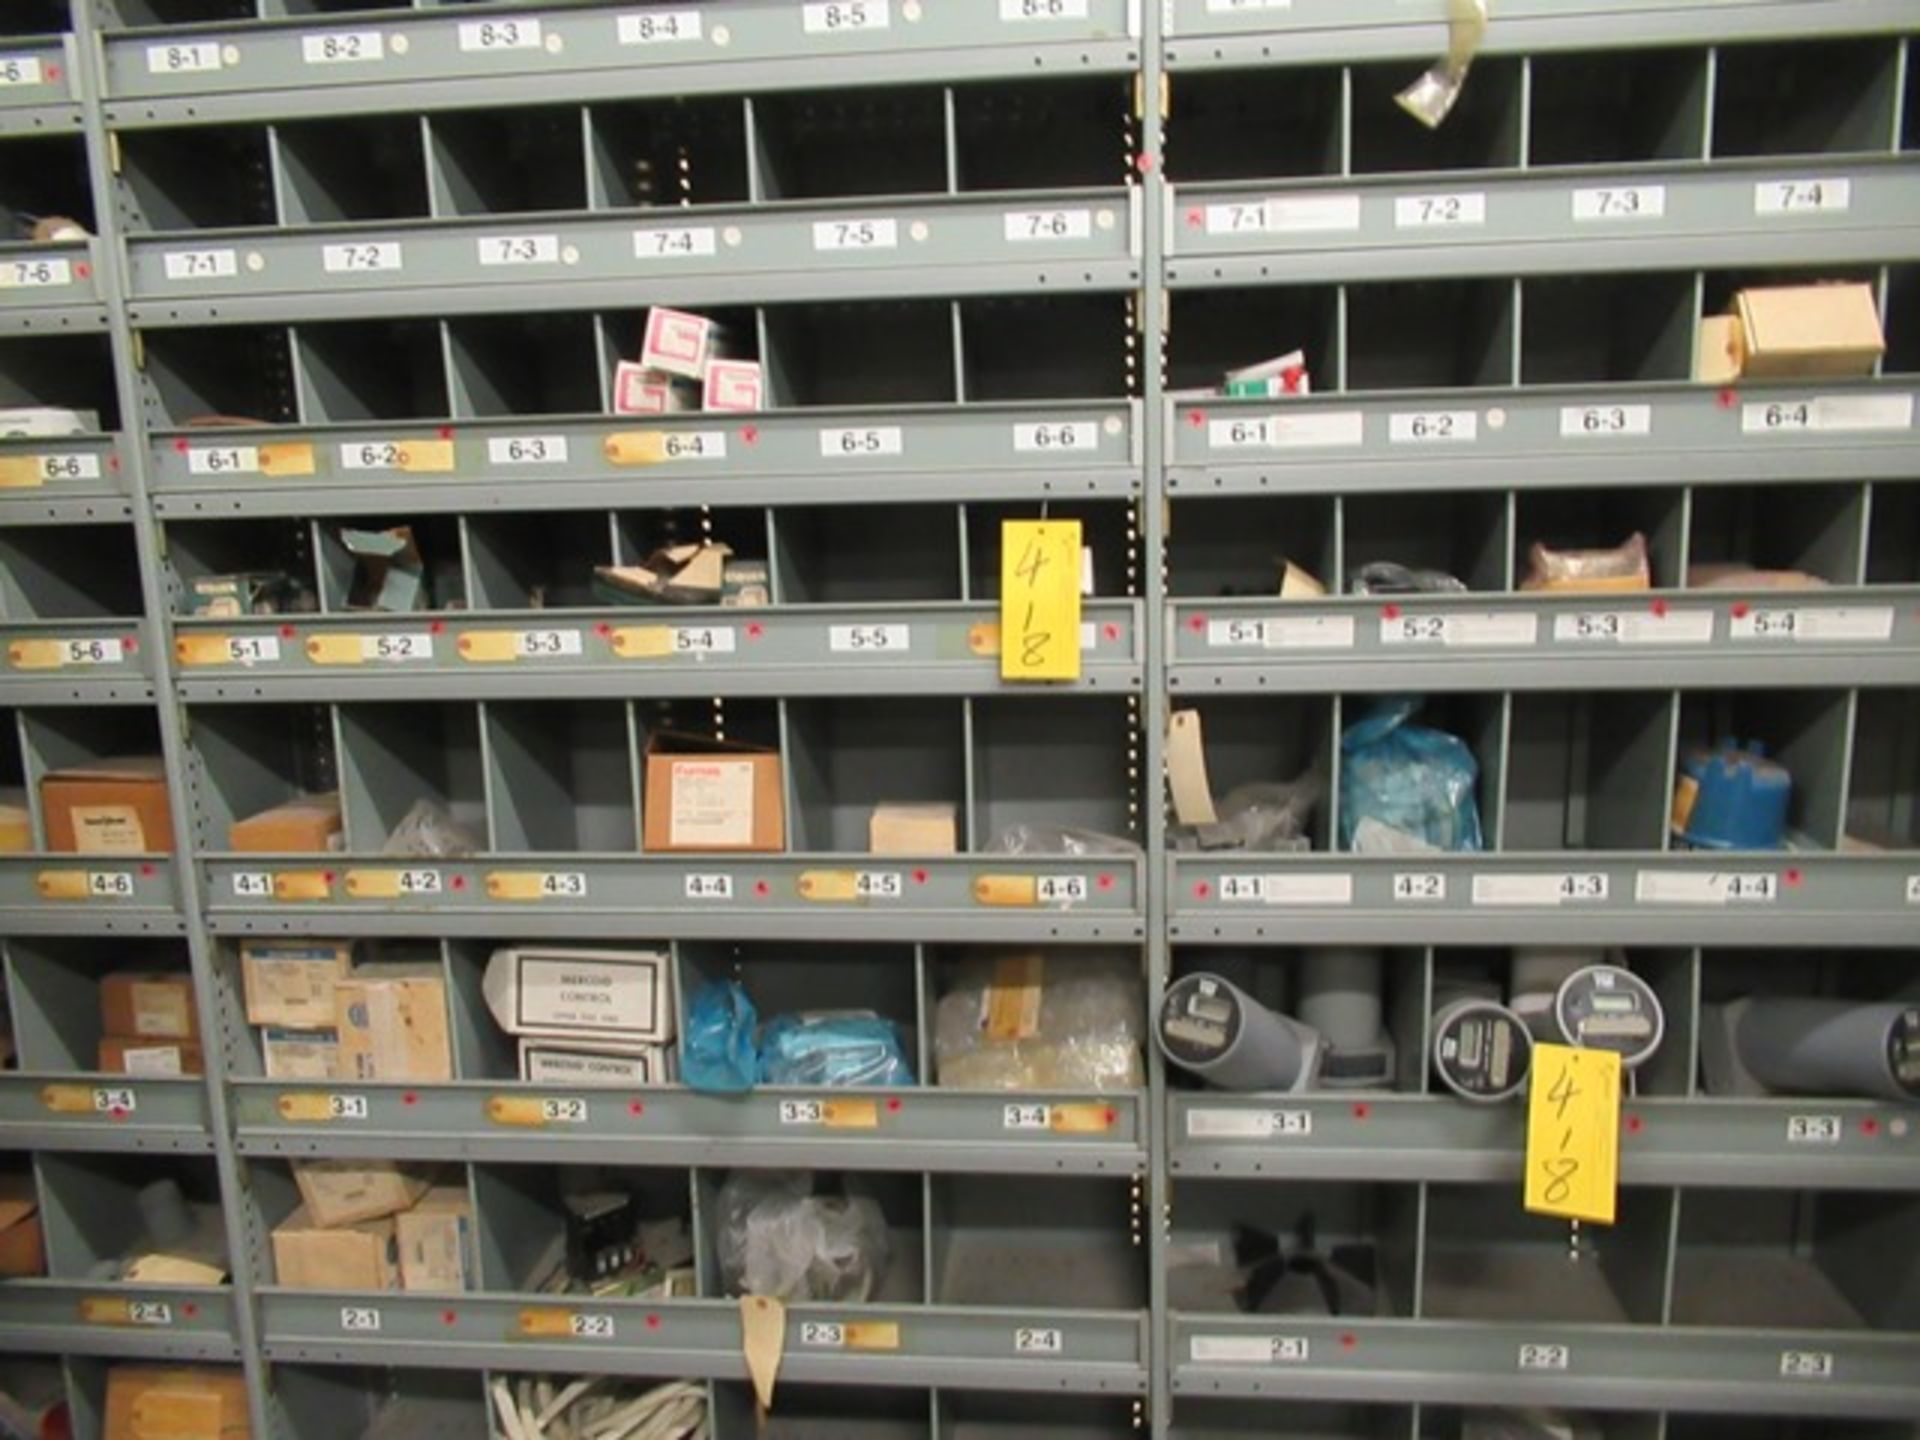 LOT ASST. CLEAVER BROOKS, SULLARI BAILEY PARTS, METERS, FILTERS, ETC. 3 SECTIONS SHELVING (M-S)